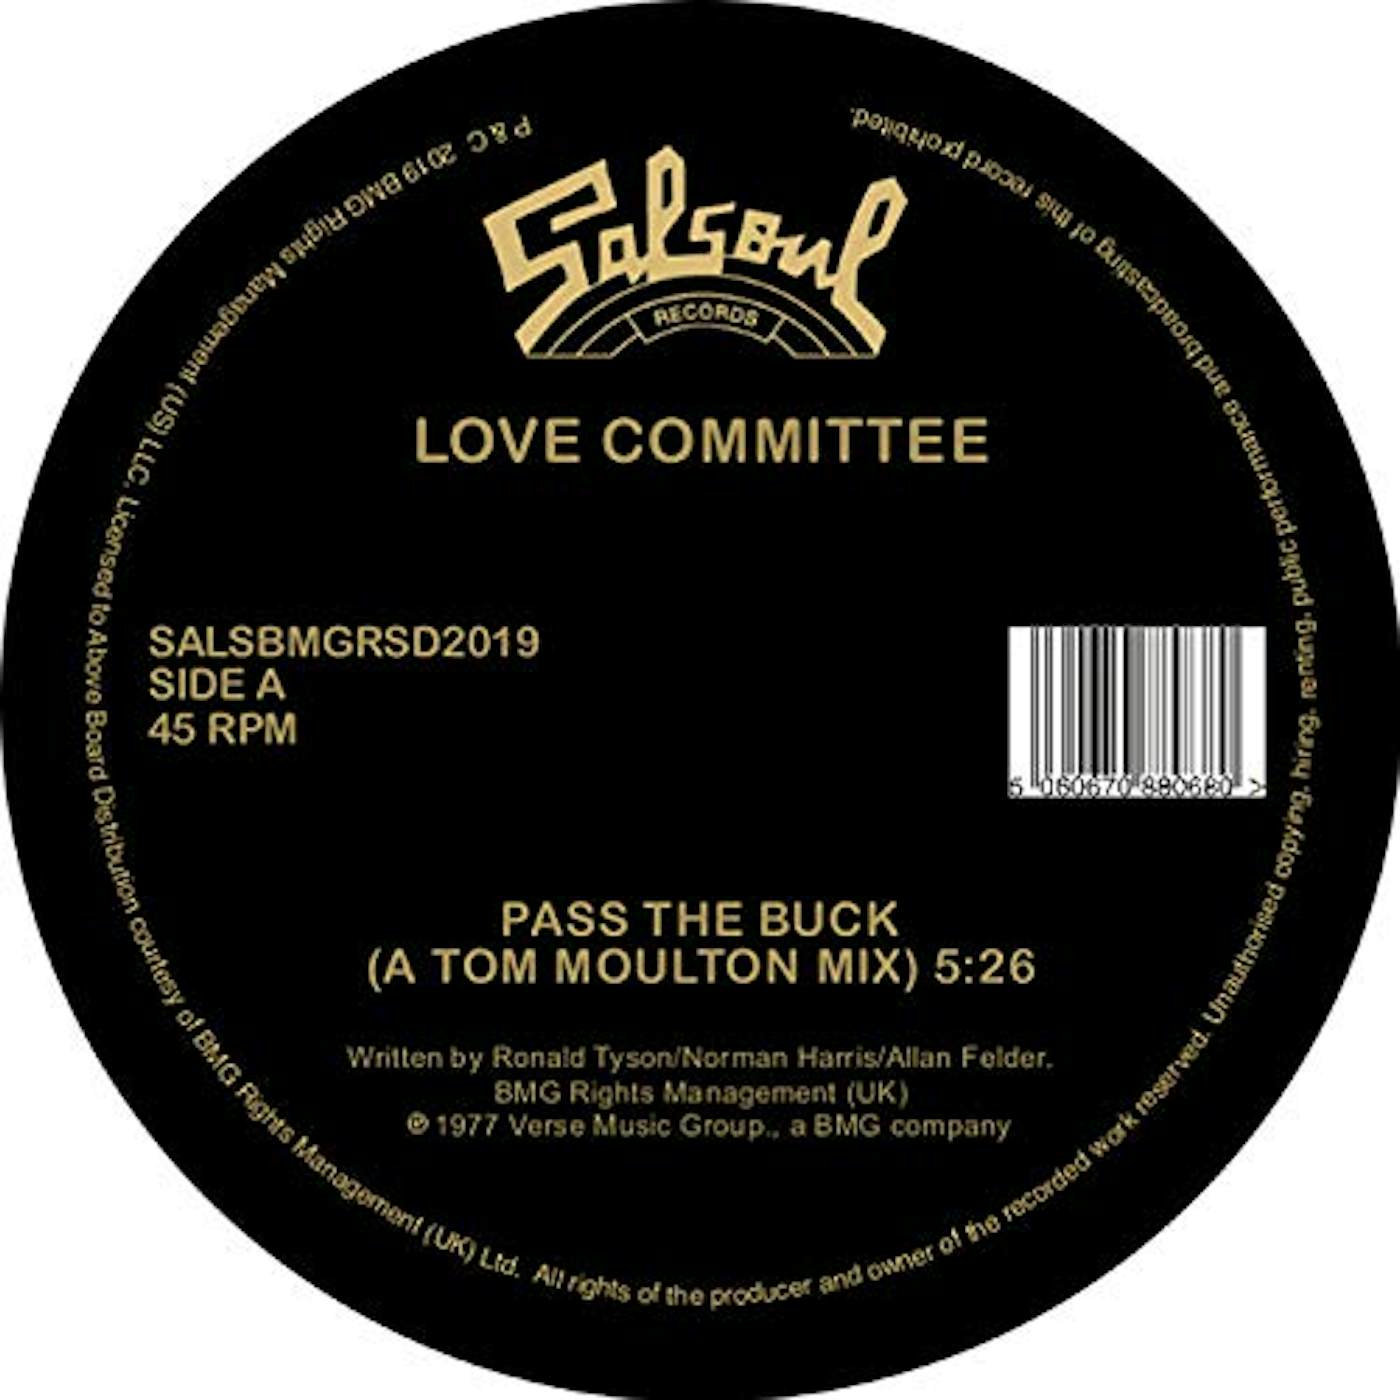 Love Committee PASS THE BUCK (TOM MOULTON MIX / JOE CLAUSSELL) Vinyl Record